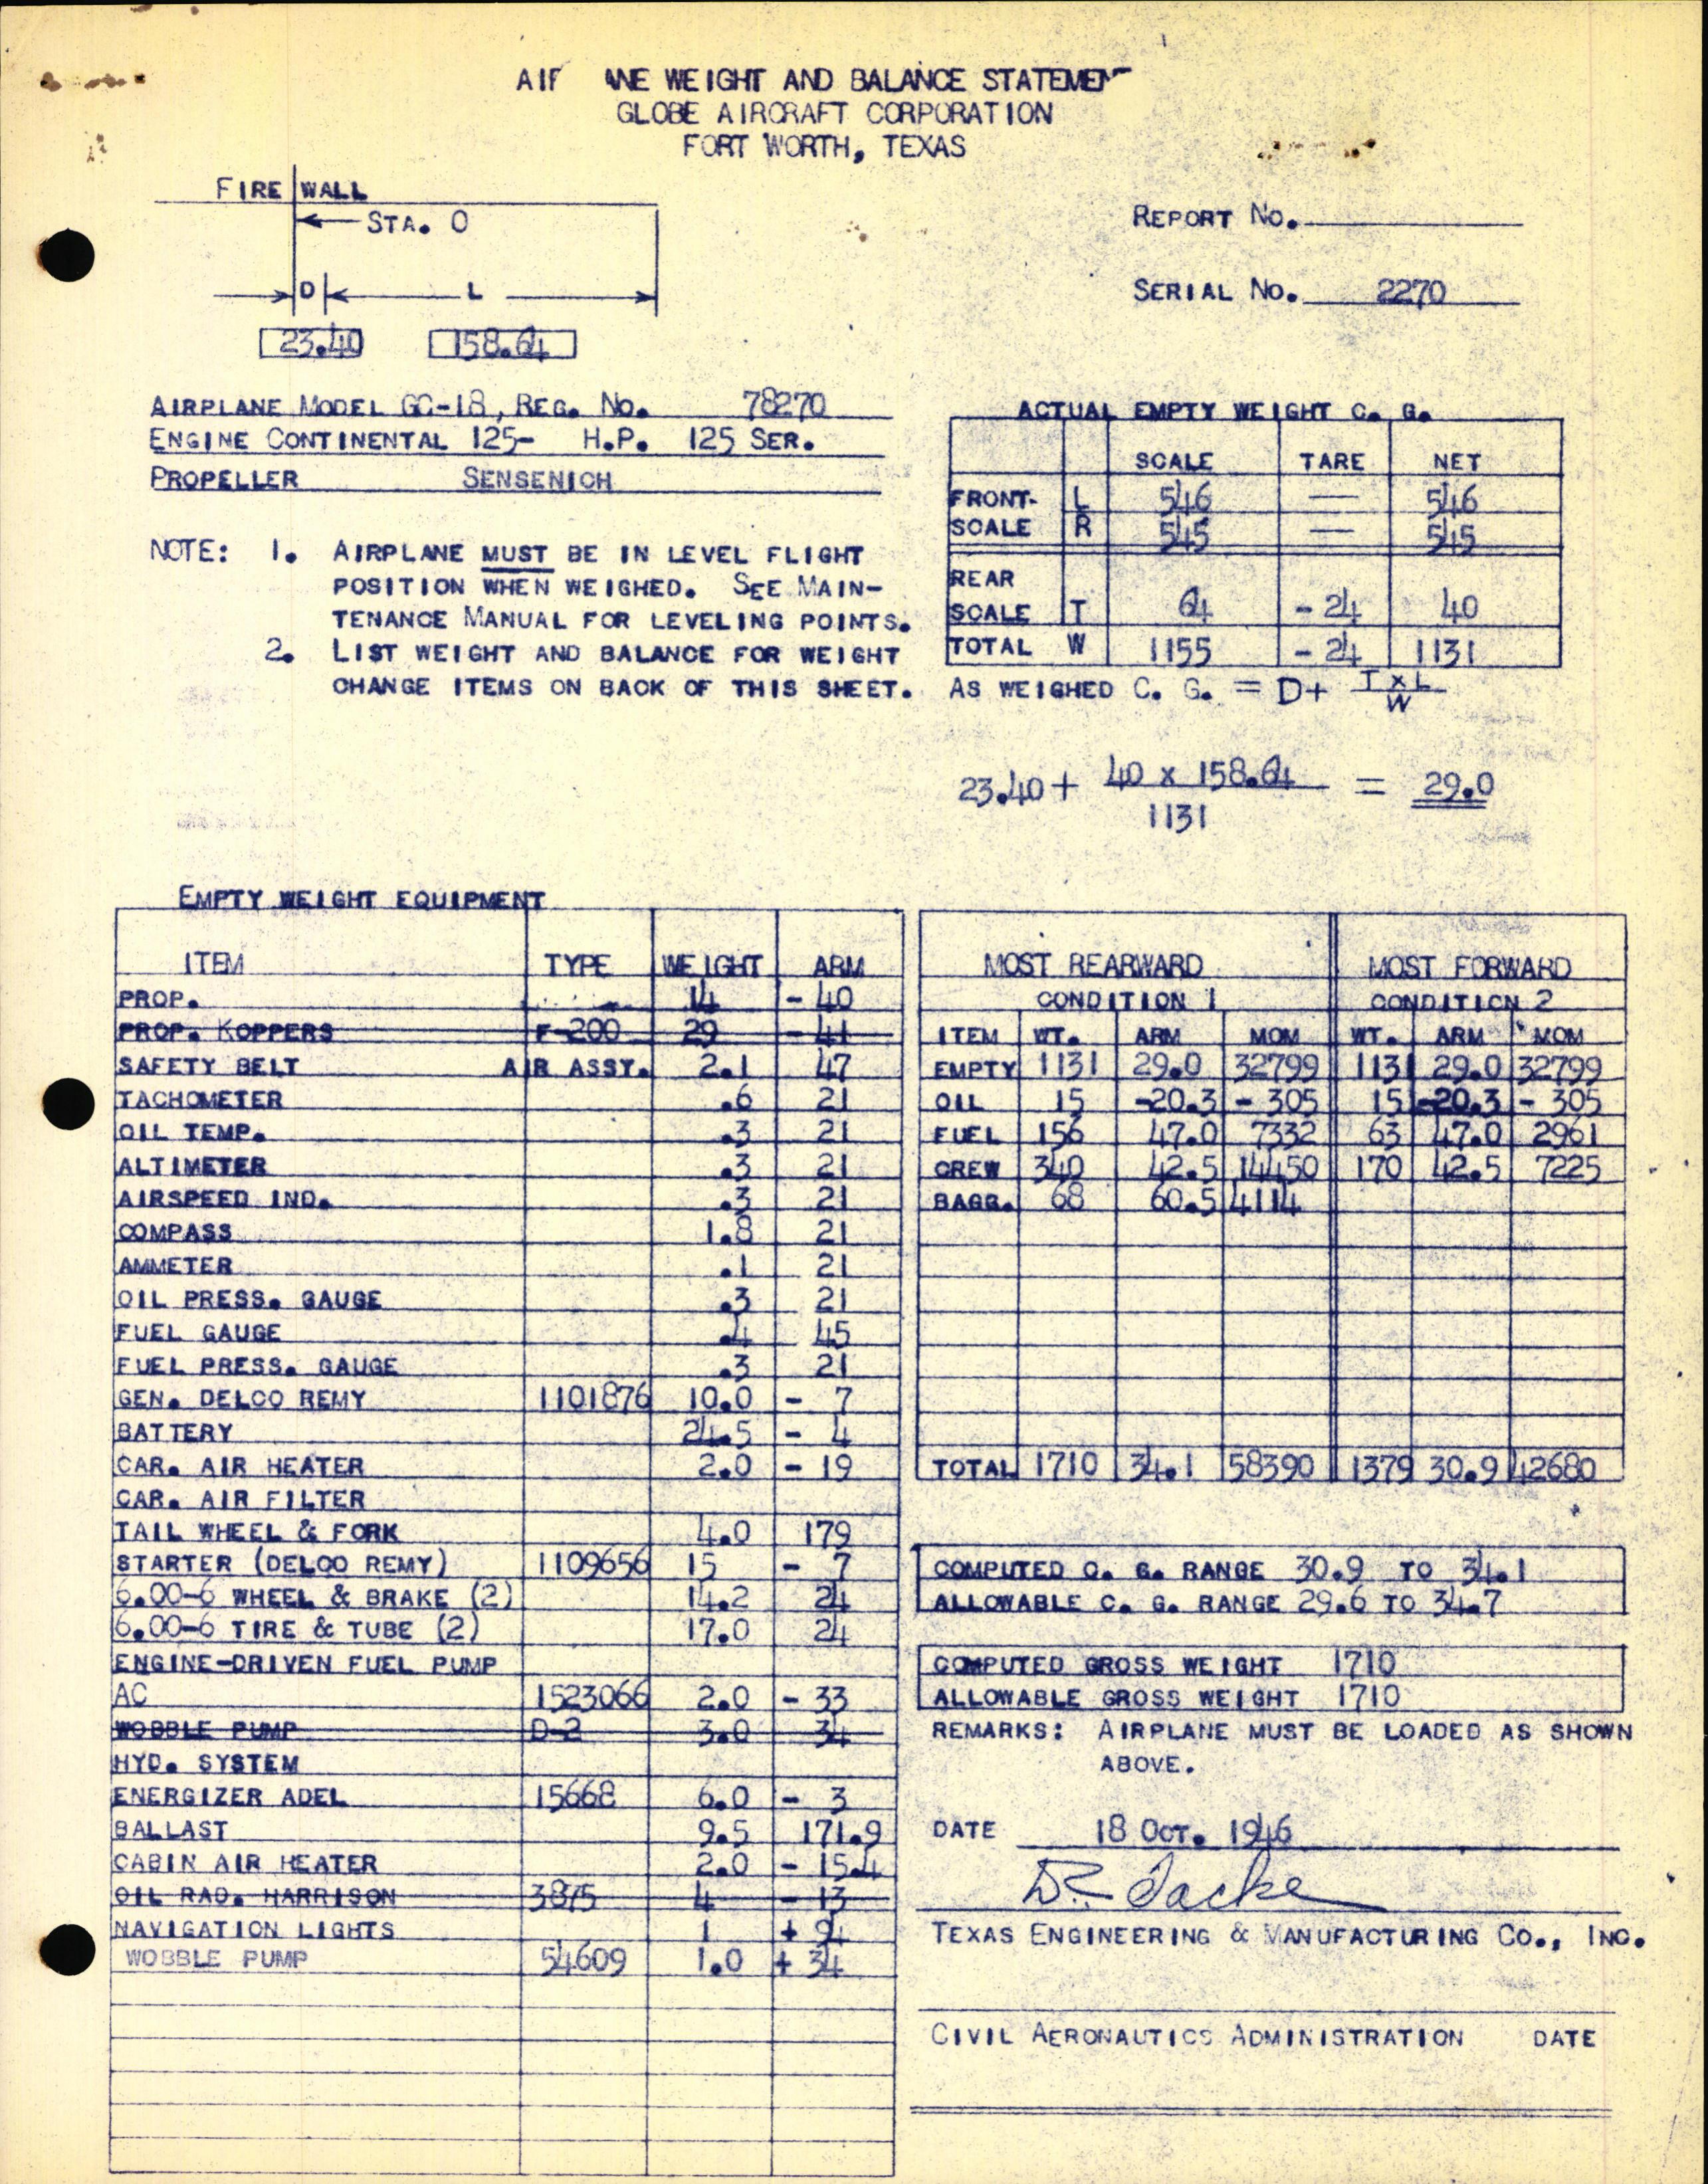 Sample page 3 from AirCorps Library document: Technical Information for Serial Number 2270